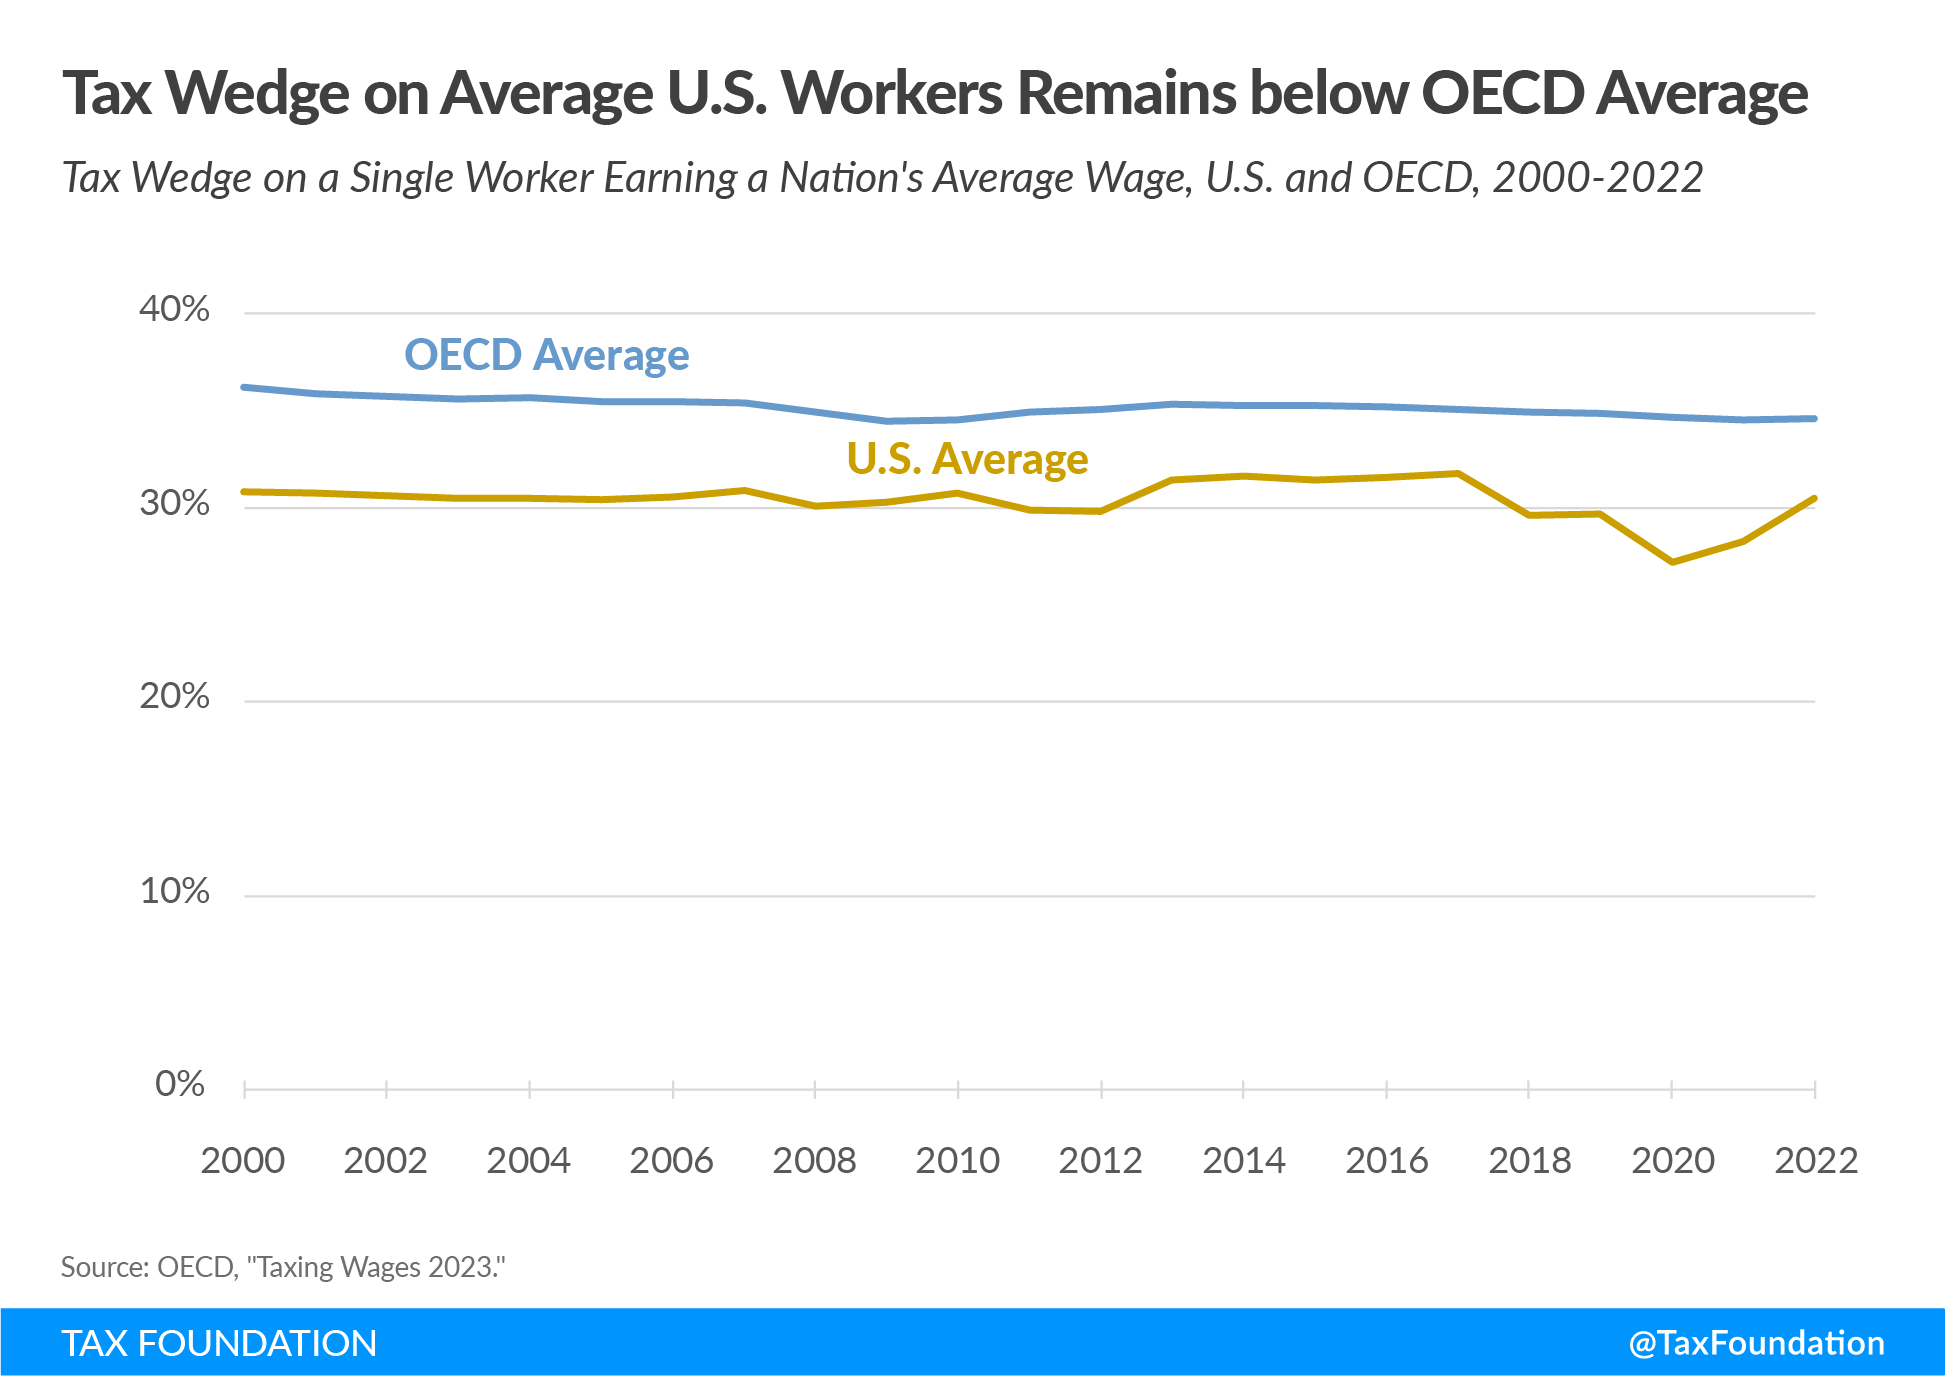 US Tax Wedge and US Tax Burden on Labor remains below OECD average